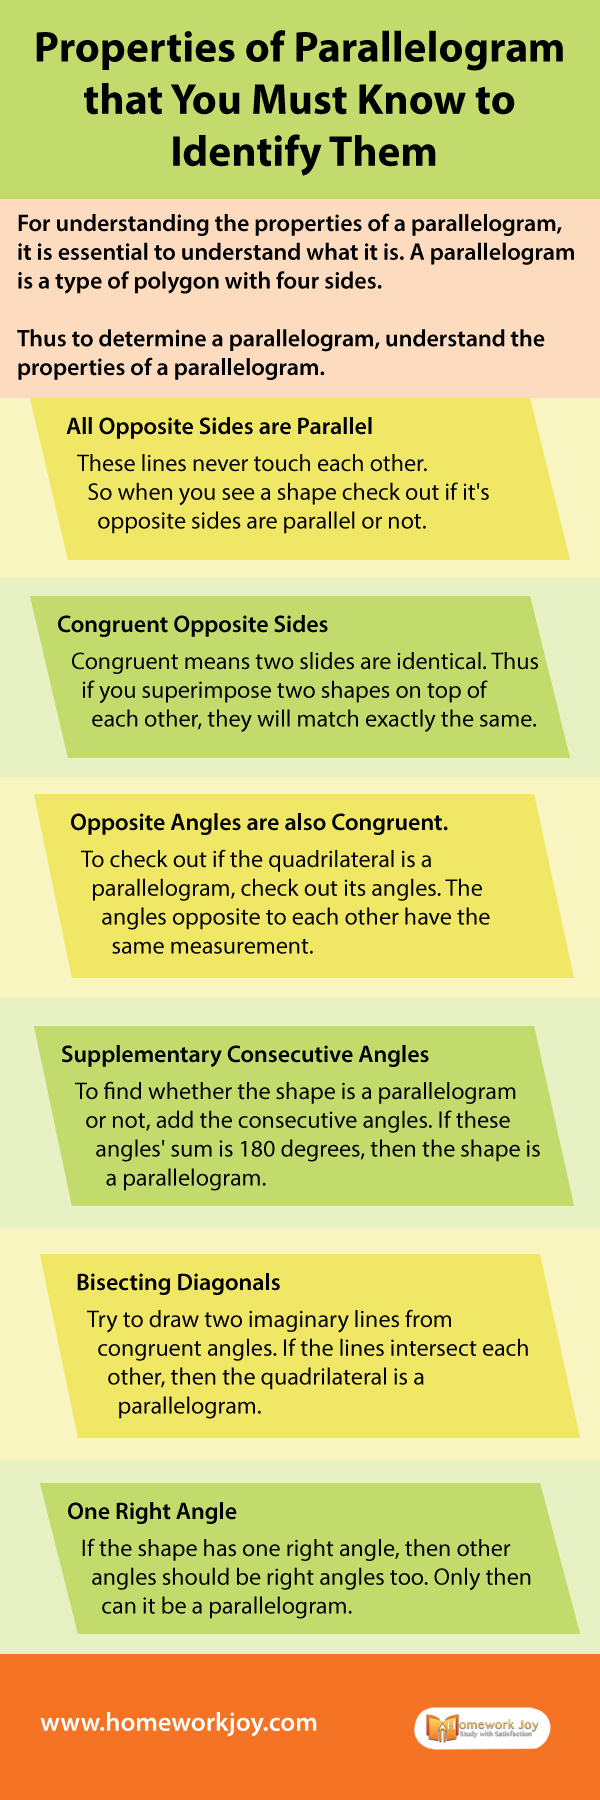 Properties-of-Parallelogram-that-You-Must-Know-to-Identify-Them